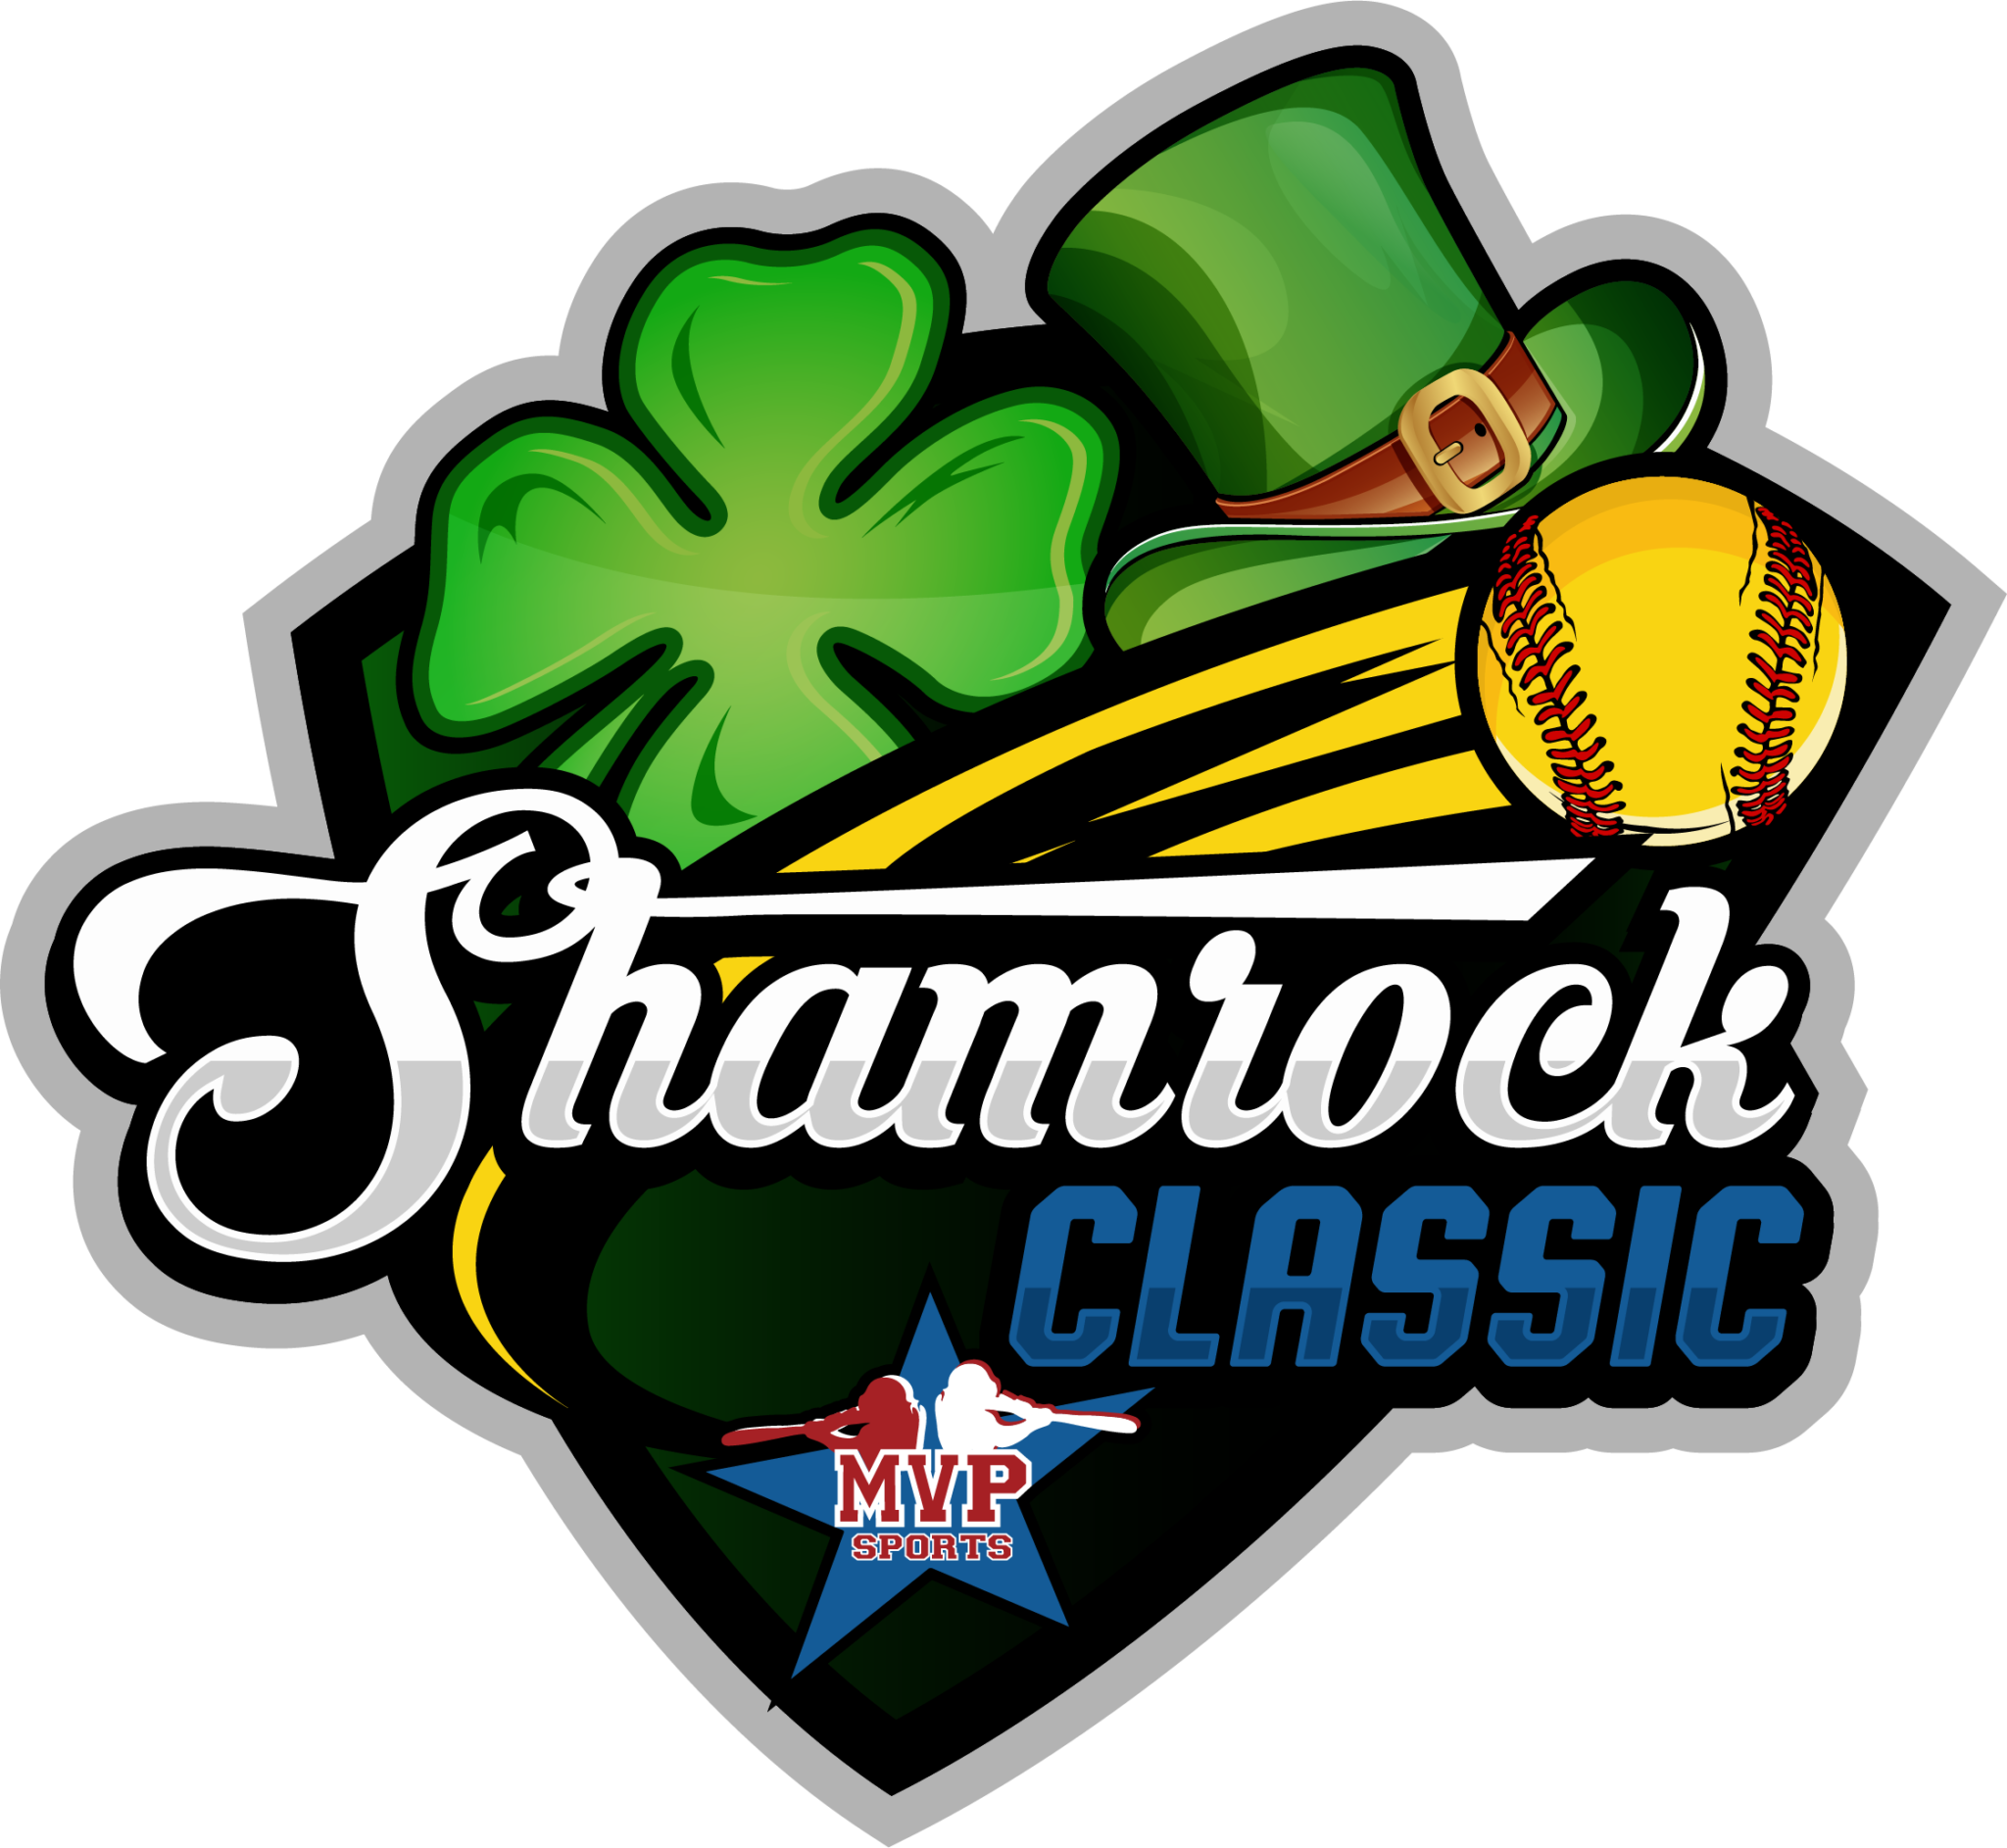 “C” SHAMROCK CLASSIC AT CALHOUN COUNTY *****AWESOME ST. PATRICK’S DAY